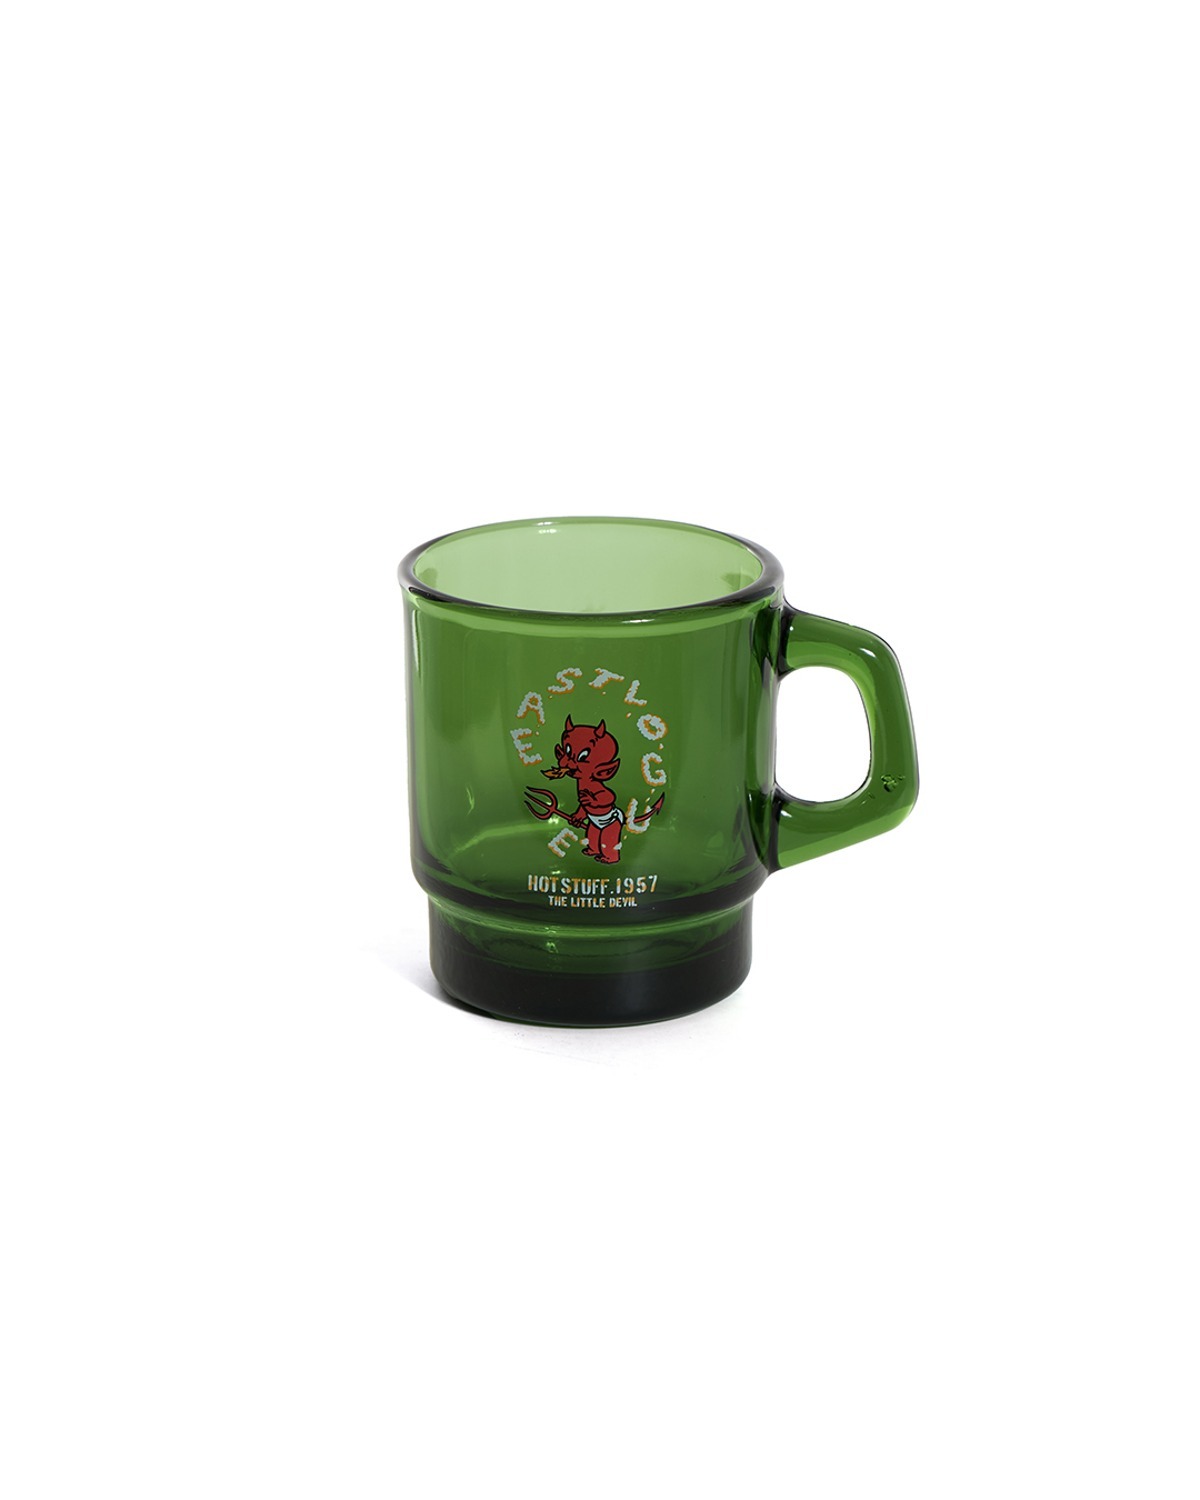 HOT STUFF VINTAGE CUP / GREEN